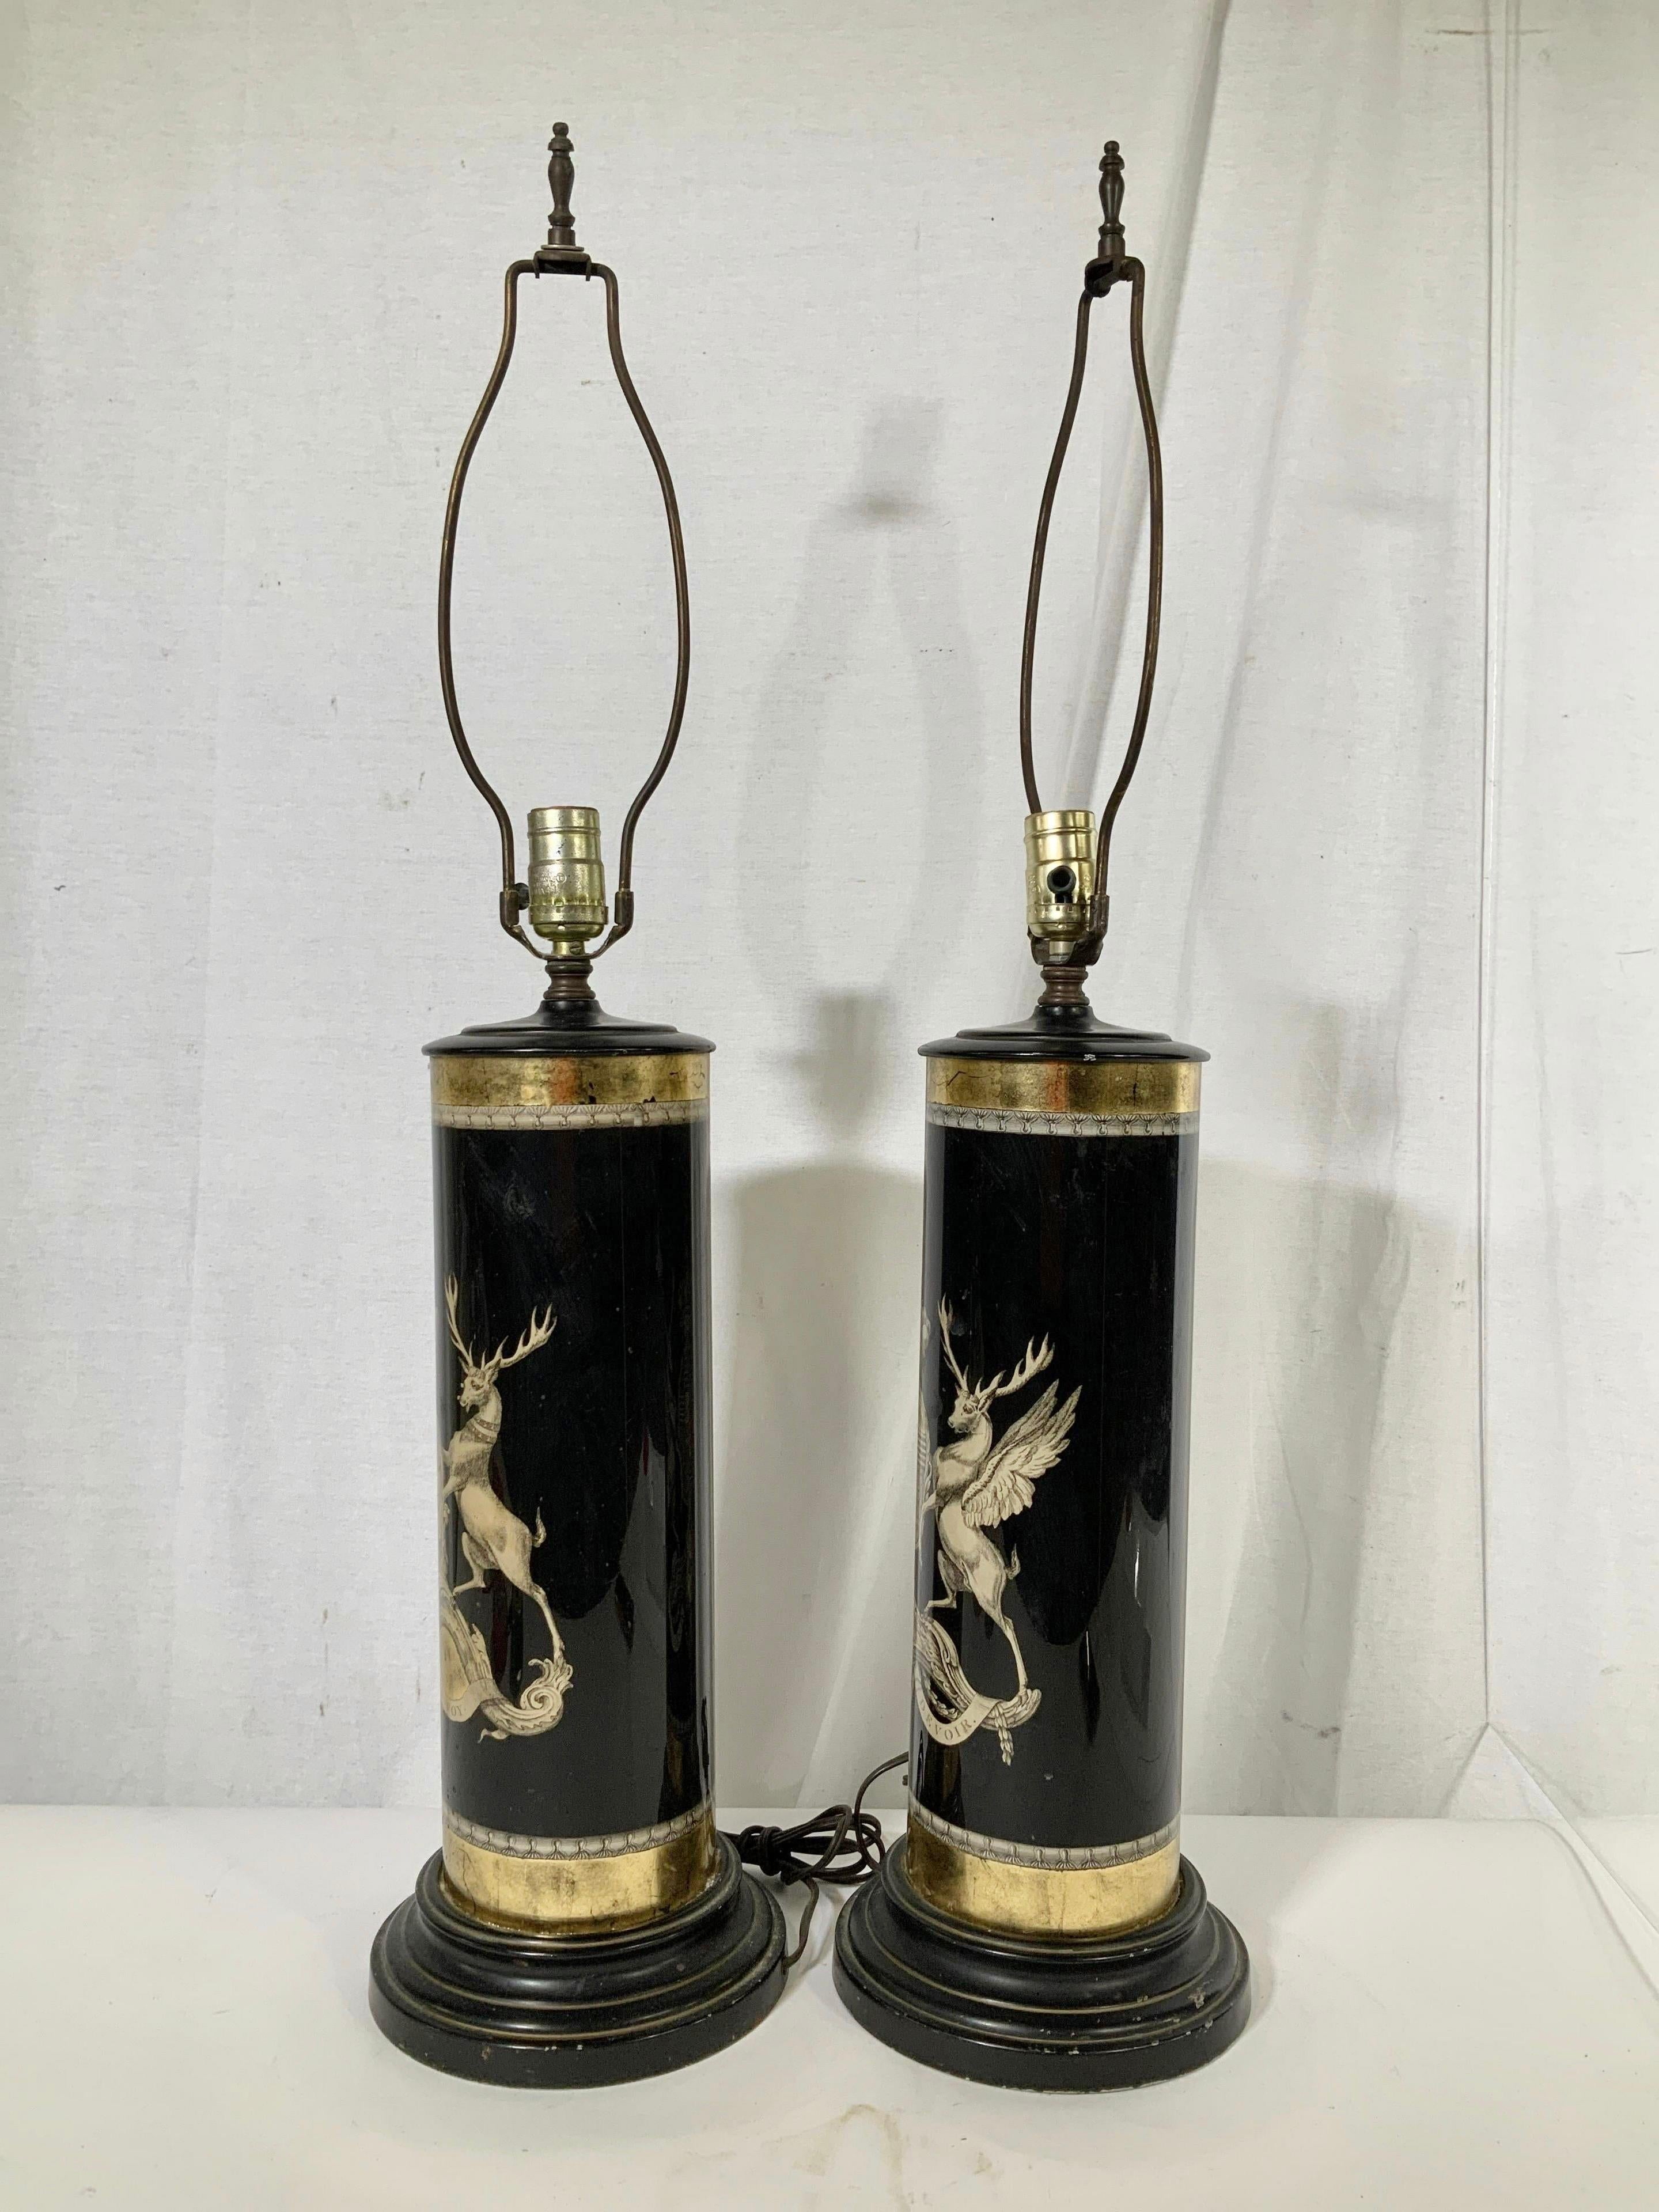 Pair of Verre Églomisé Lamps Coats of Arms for the Earls Bathurst and Granville For Sale 1